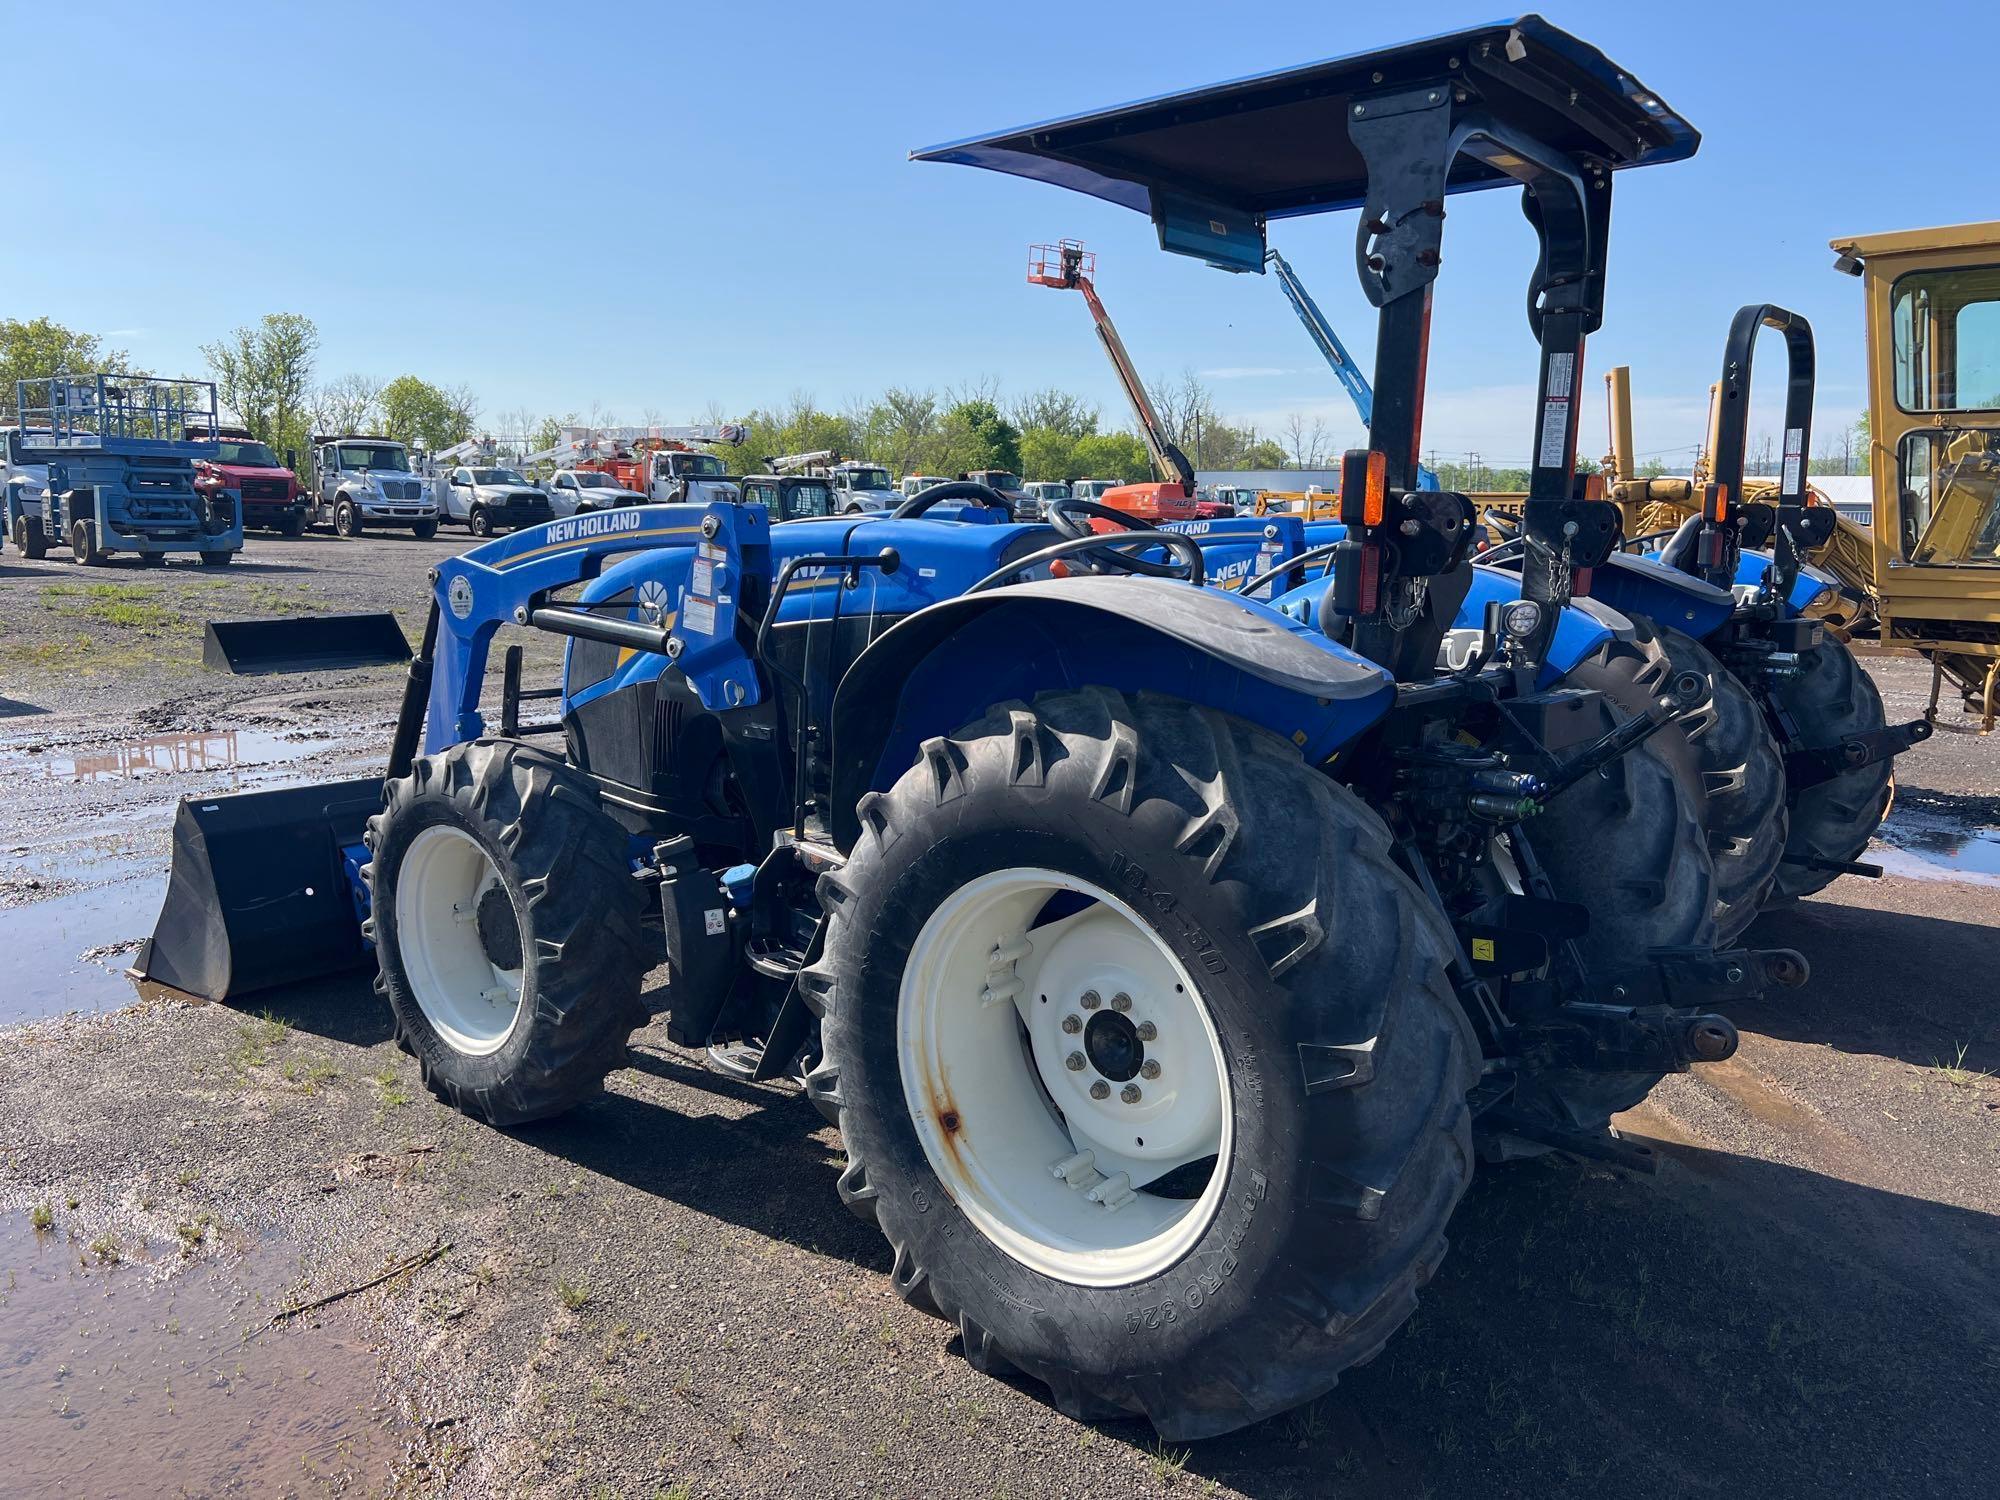 2020 NEW HOLLAND WORKMASTER 95 TRACTOR LOADER SN:NH1491473 4x4, powered by diesel engine, equipped